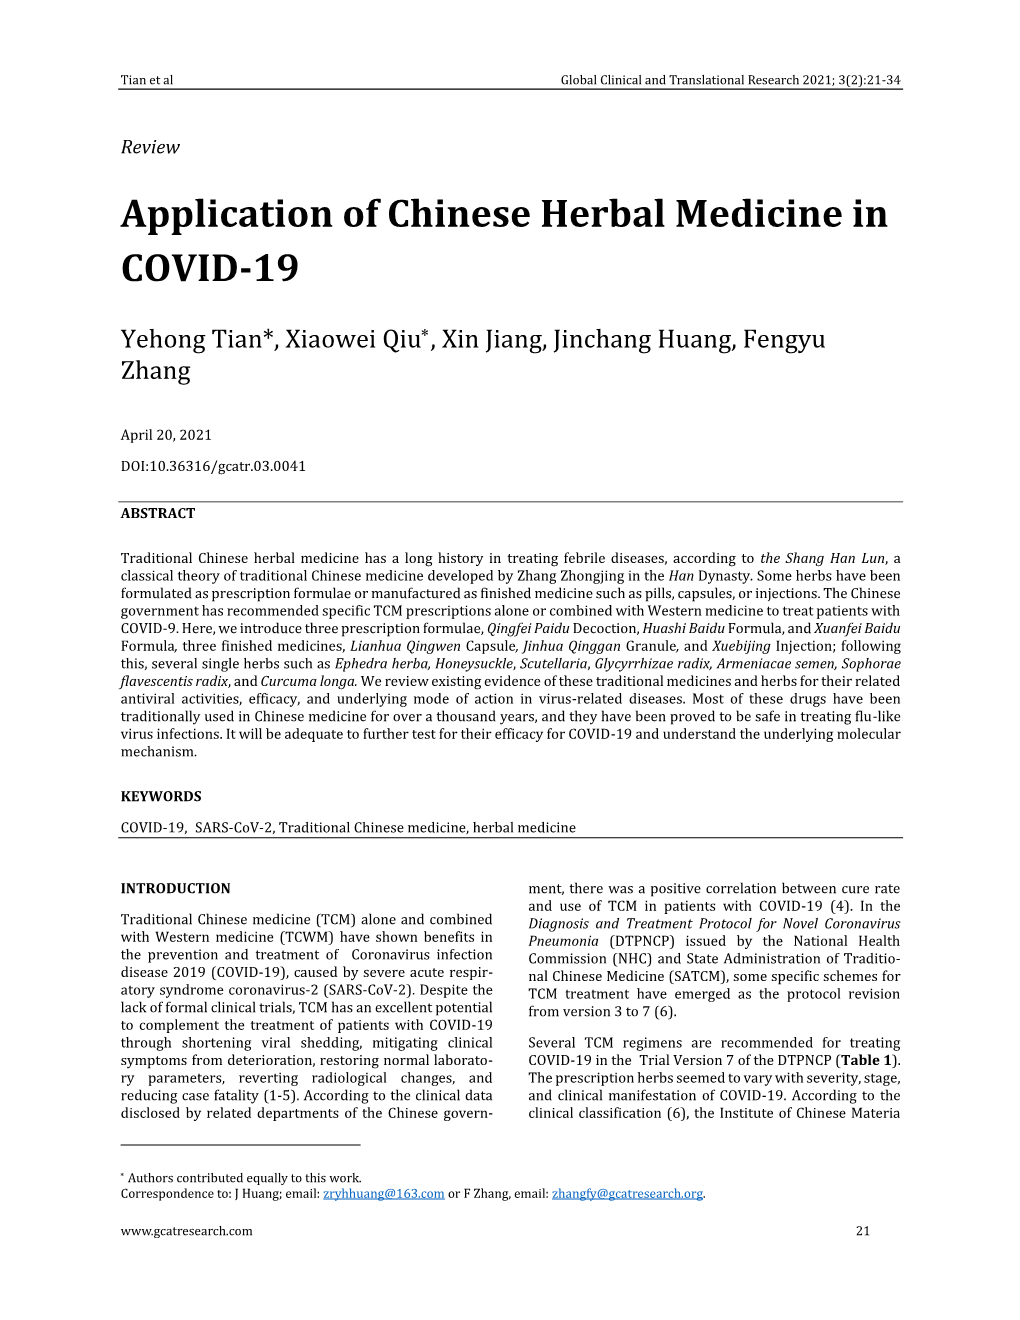 Application of Chinese Herbal Medicine in COVID-19